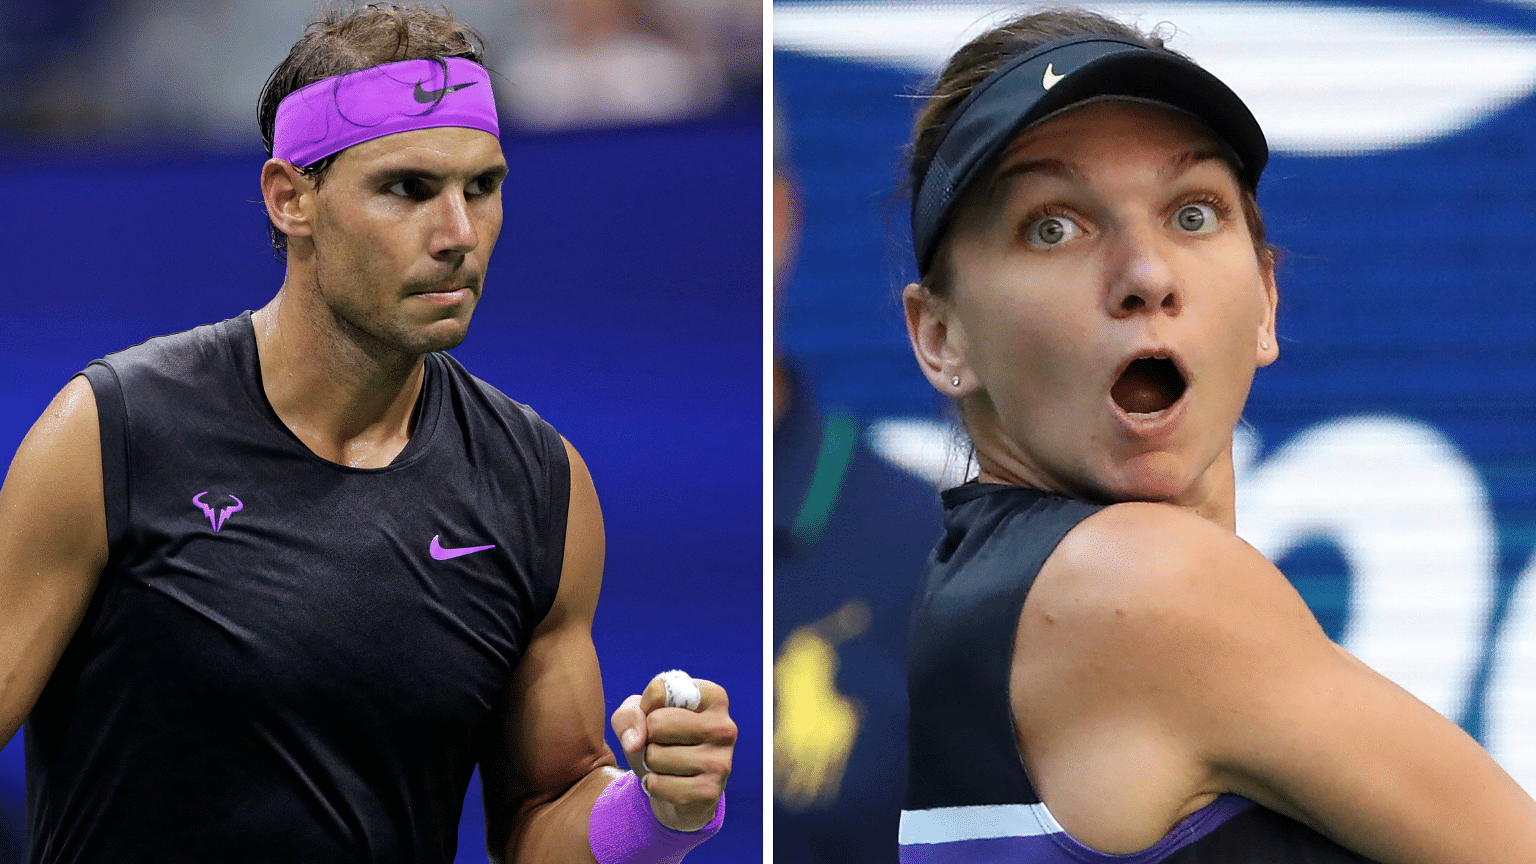 From left: Rafael Nadal and Simona Halep.